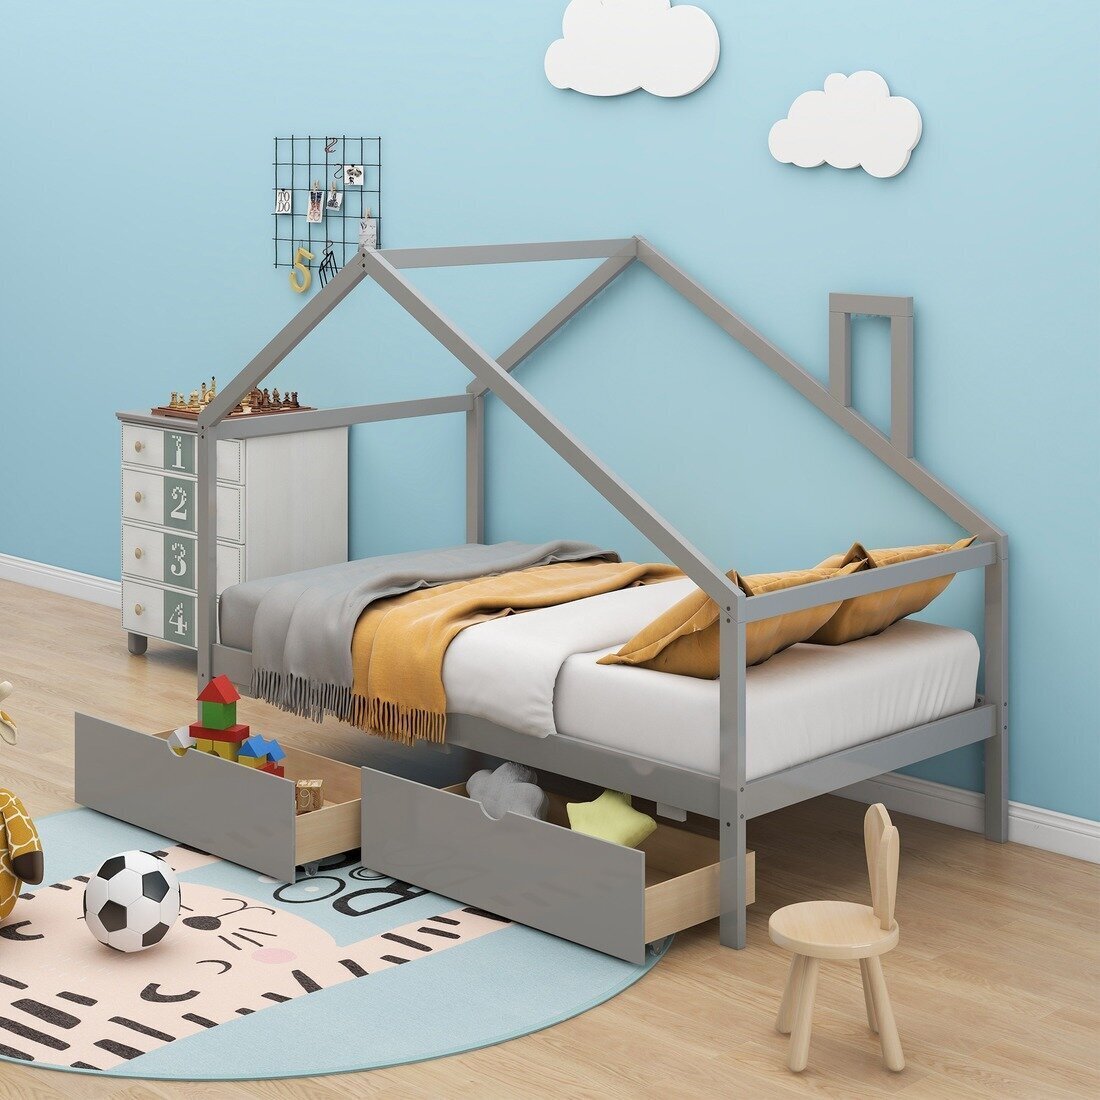 House Shape Canopy For Toddler Bed 